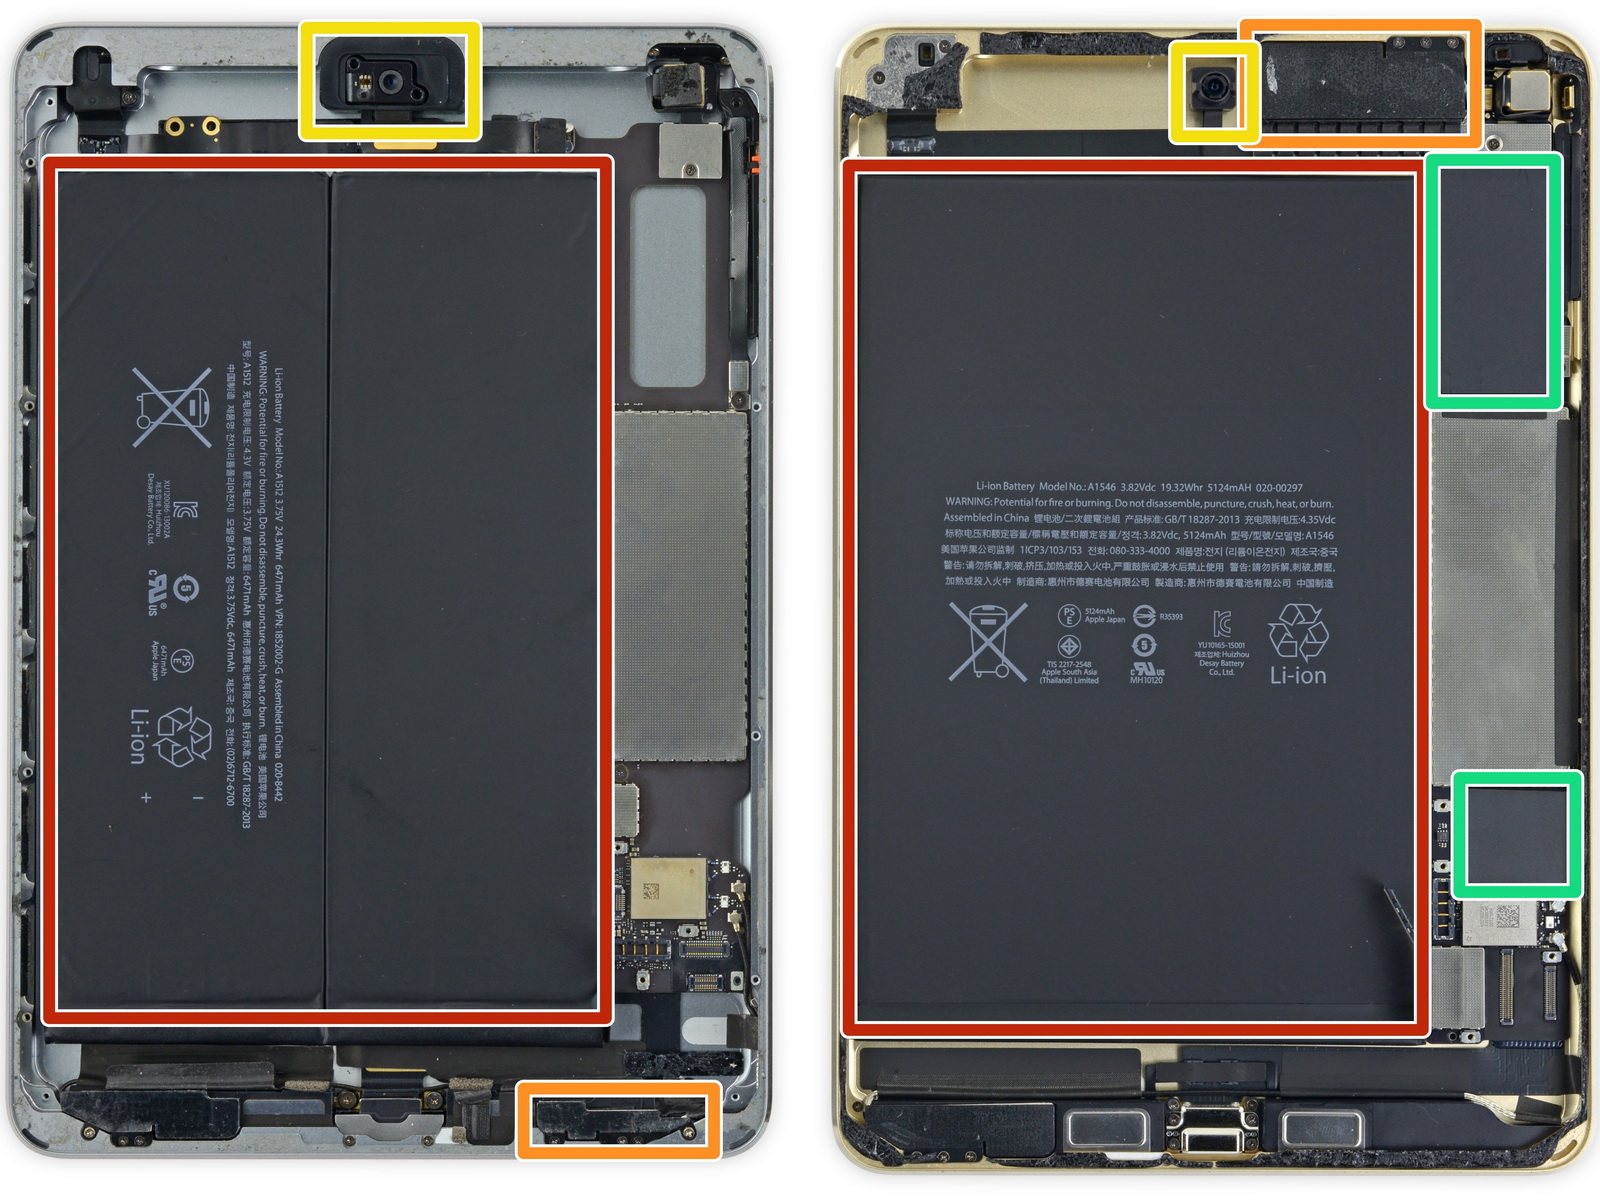 Apple iPad Mini 4 is difficult to repair says iFixit - NotebookCheck.net News